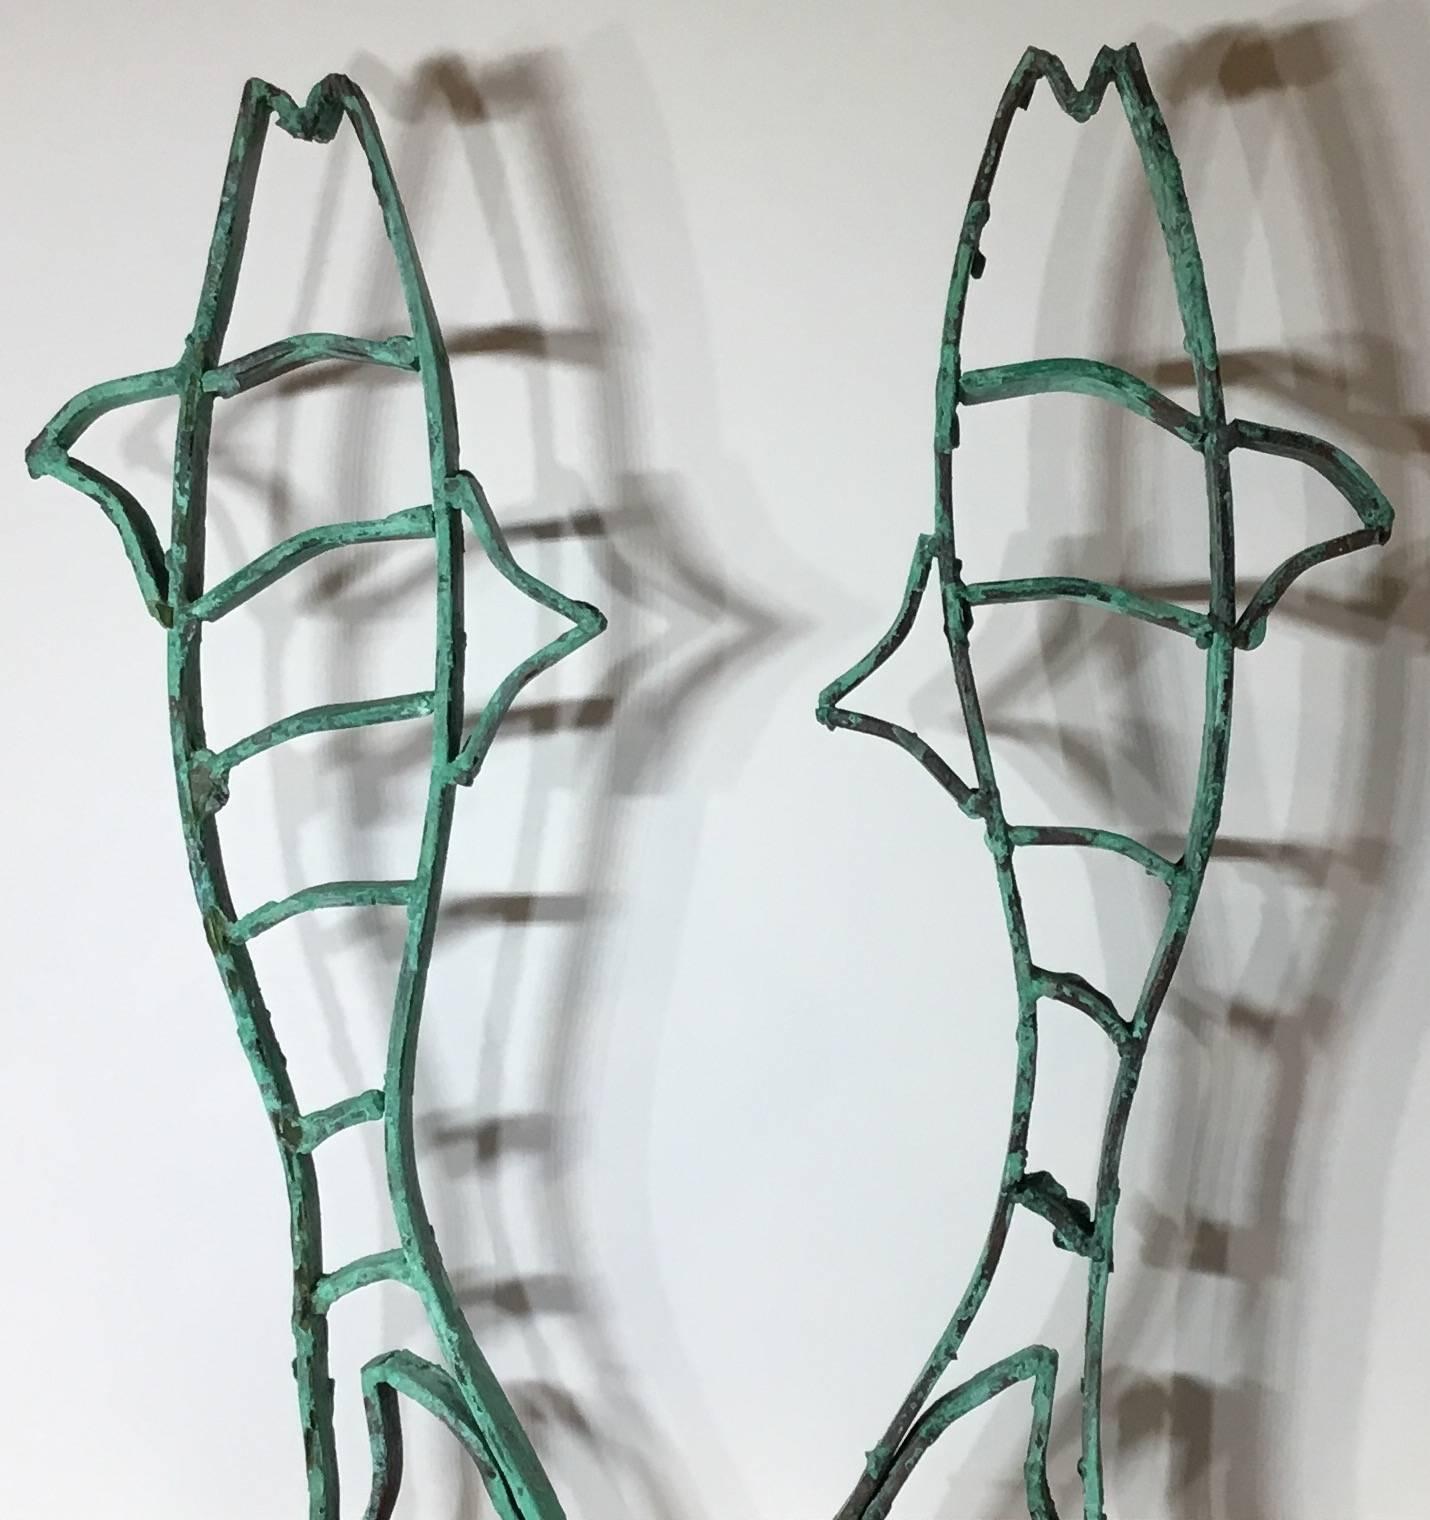 One of a kind pair of fish sculpture made of copper beautifully weathered oxidized, professionally mounted on a steel base painted in black.
This fish sculptures were part of a gate in palm beach estate in the 1920s
We acquire the salvaged gate